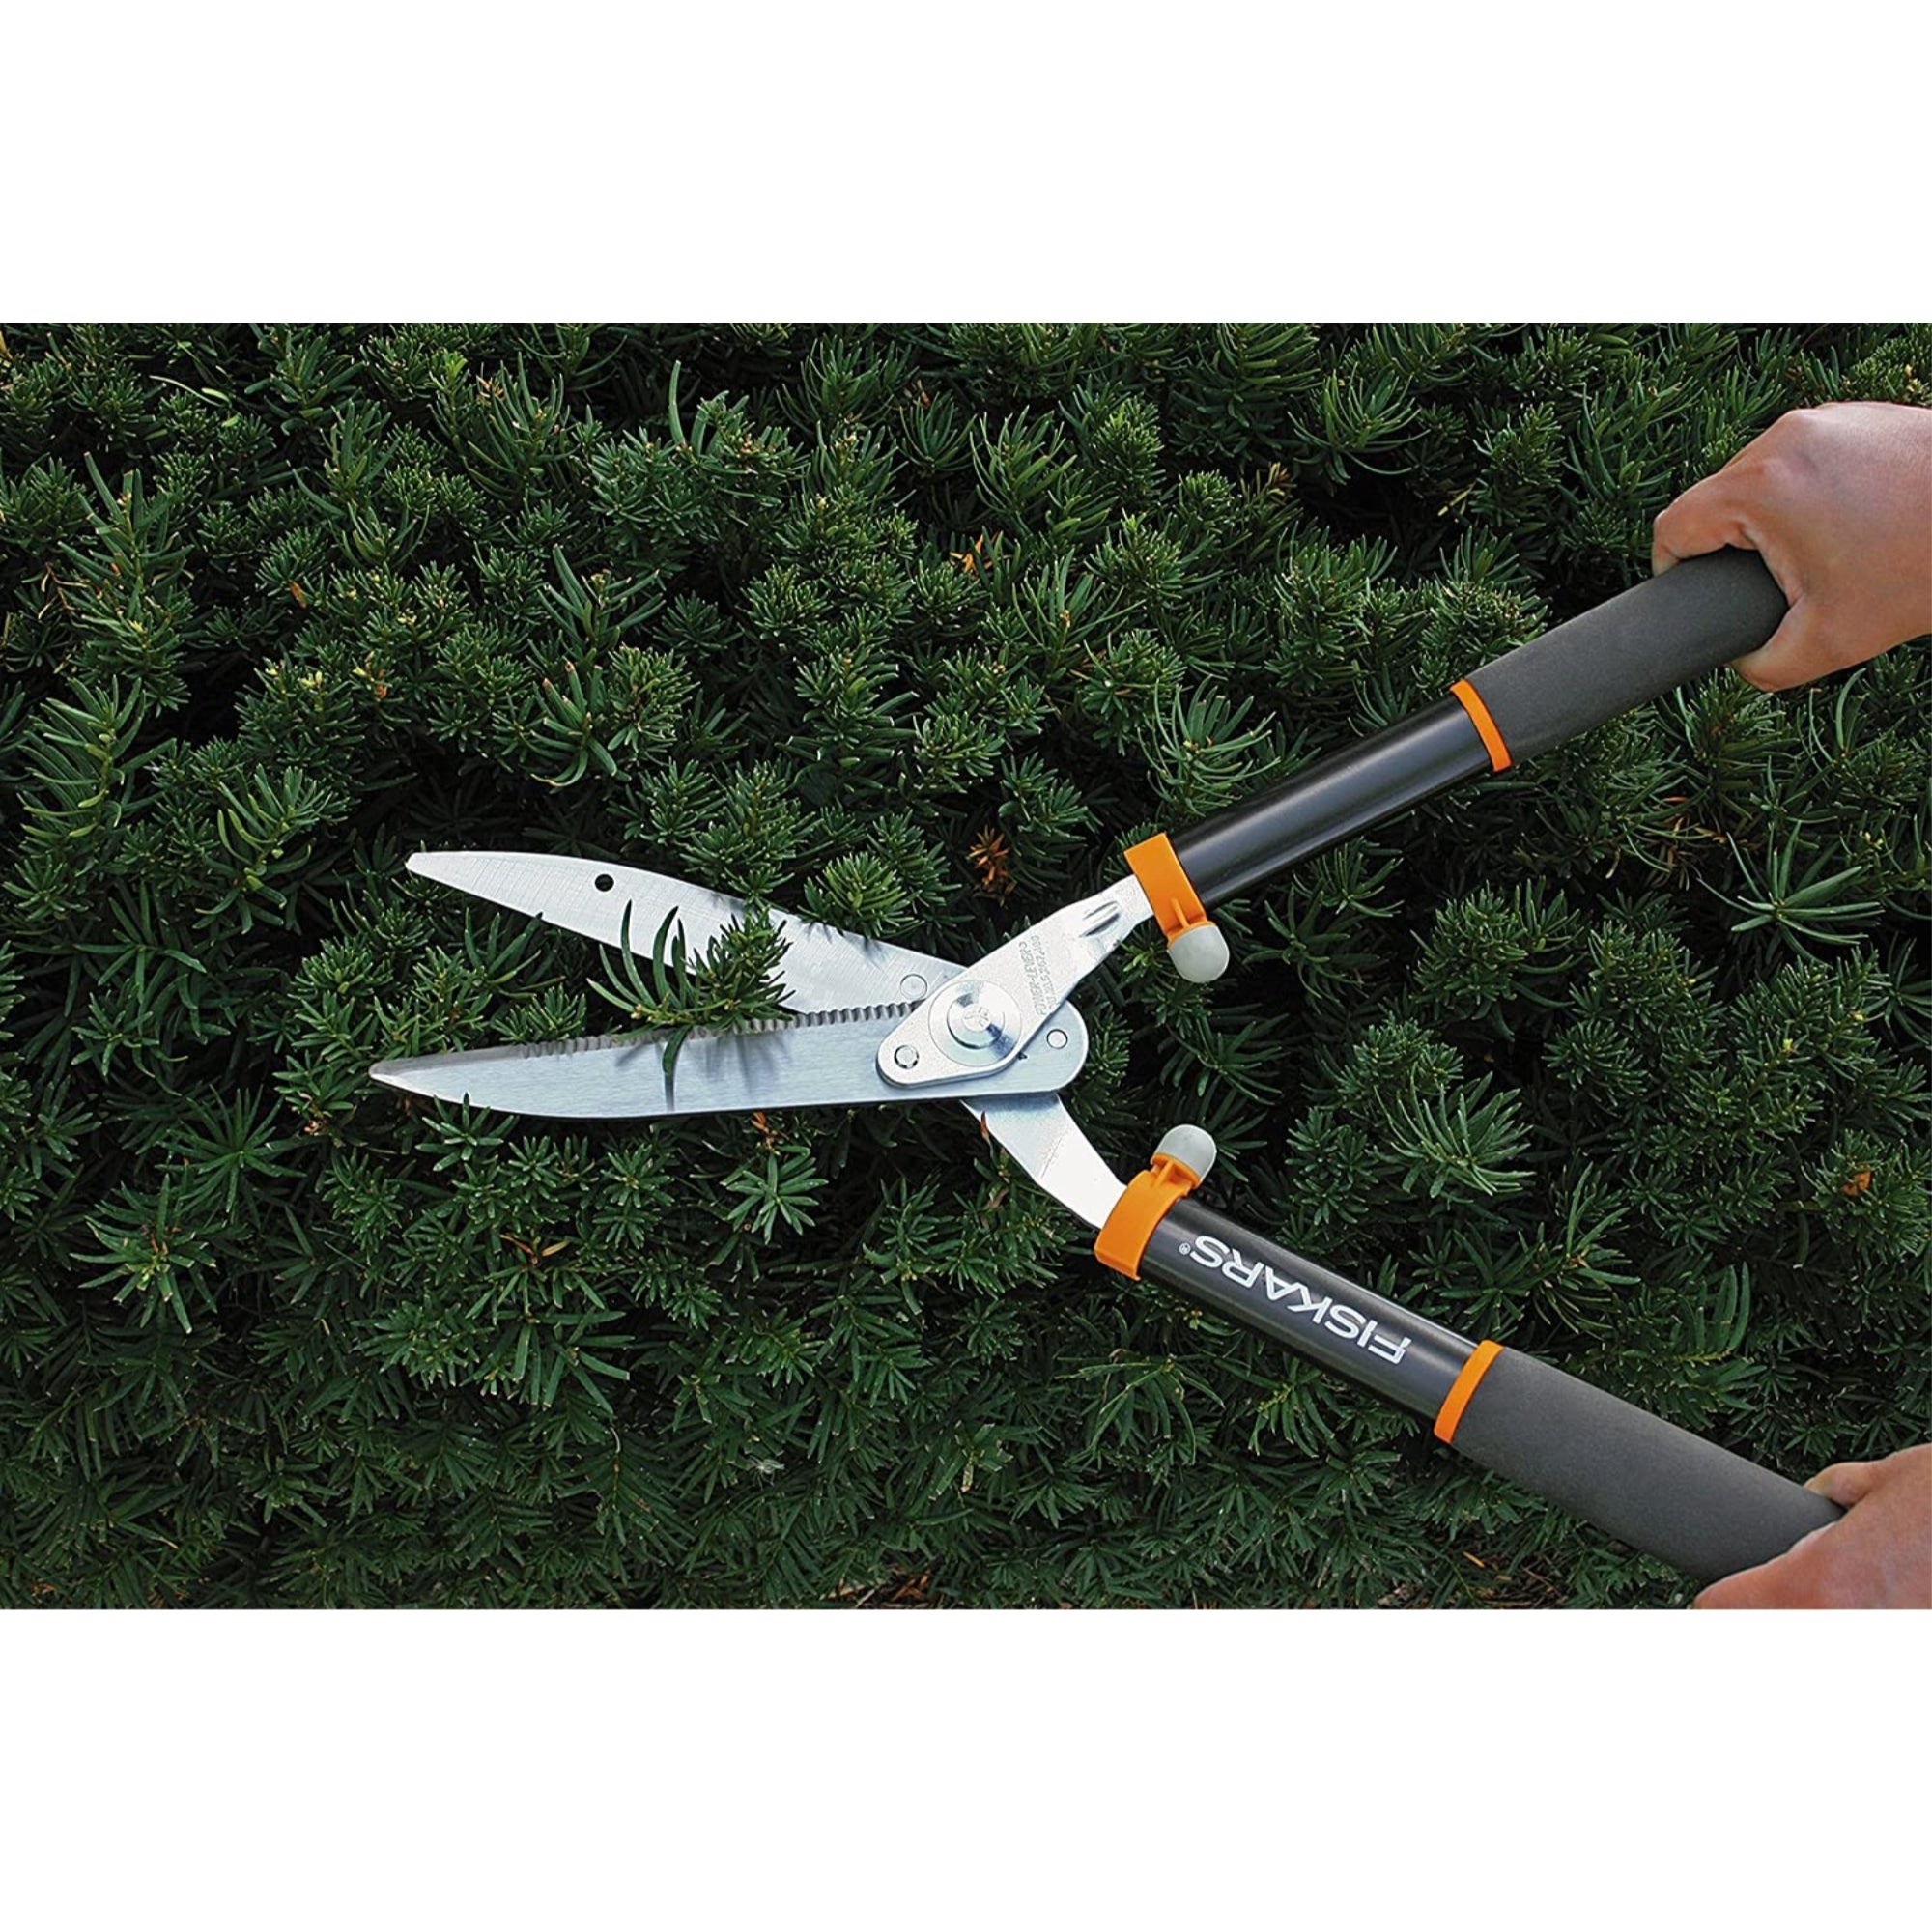 Fiskars 9191 Power Lever 8-Inch Hedge Shears With Soft Grip Handle